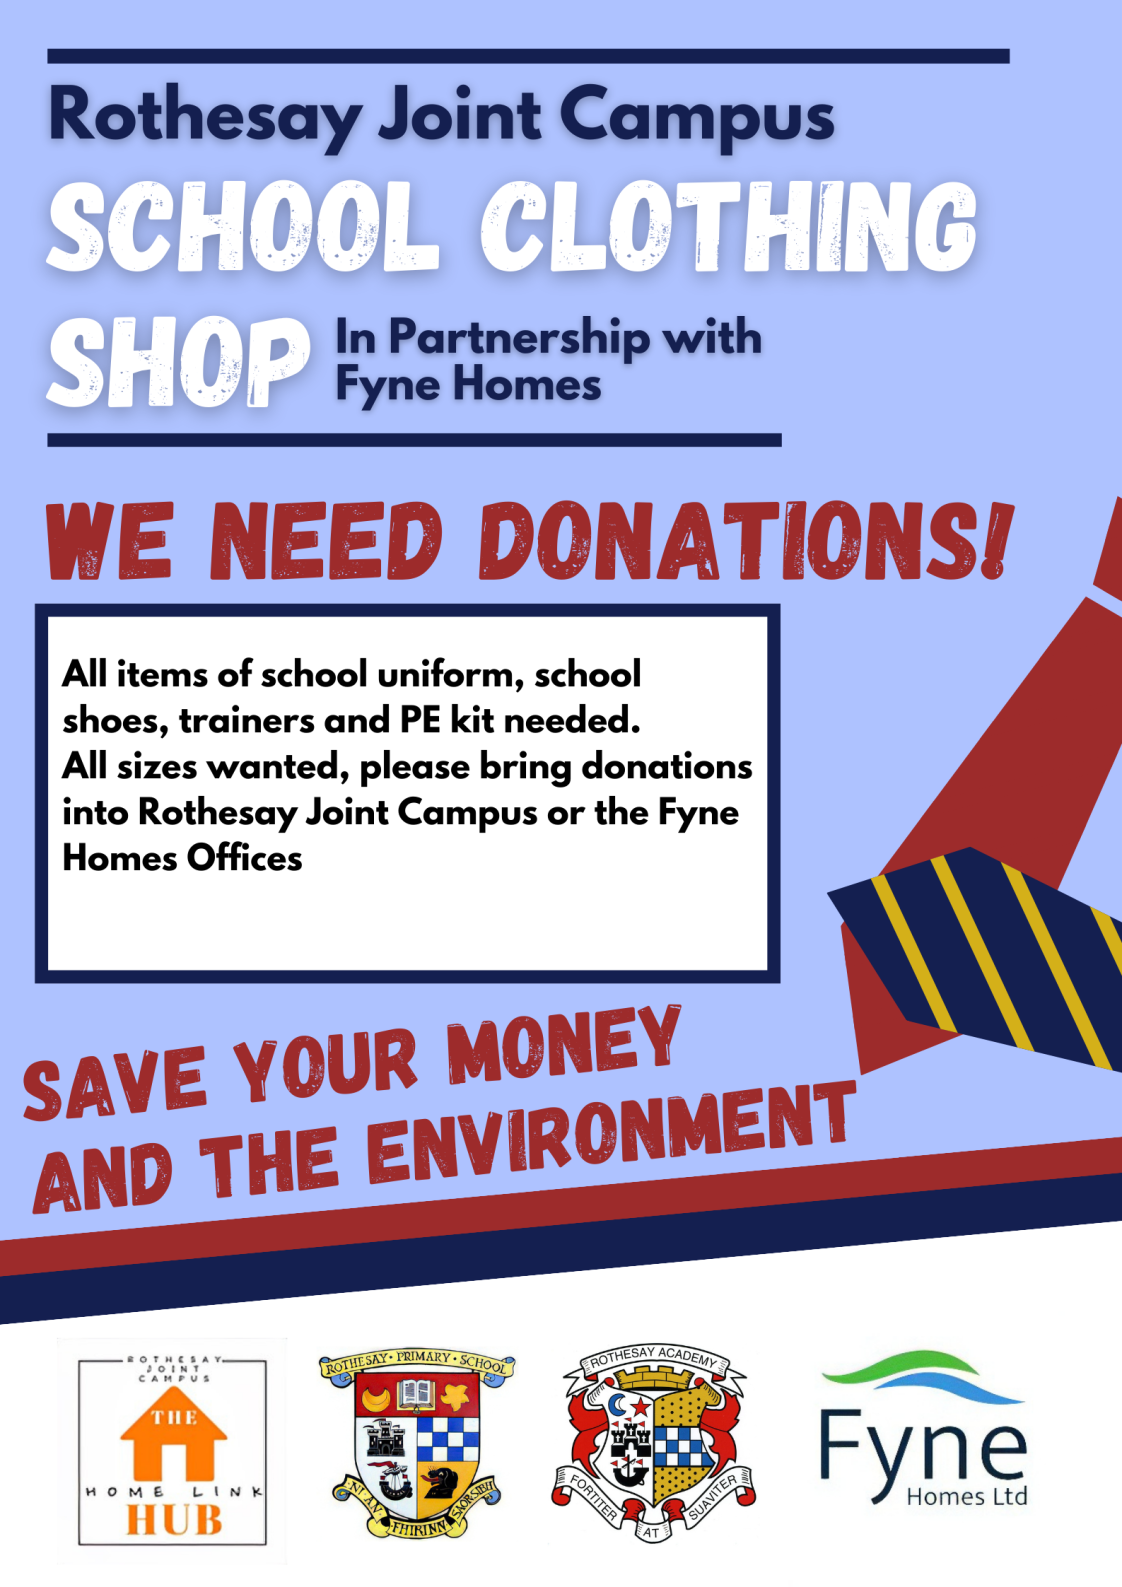 Rothesay Joint Campus School Clothing Shop